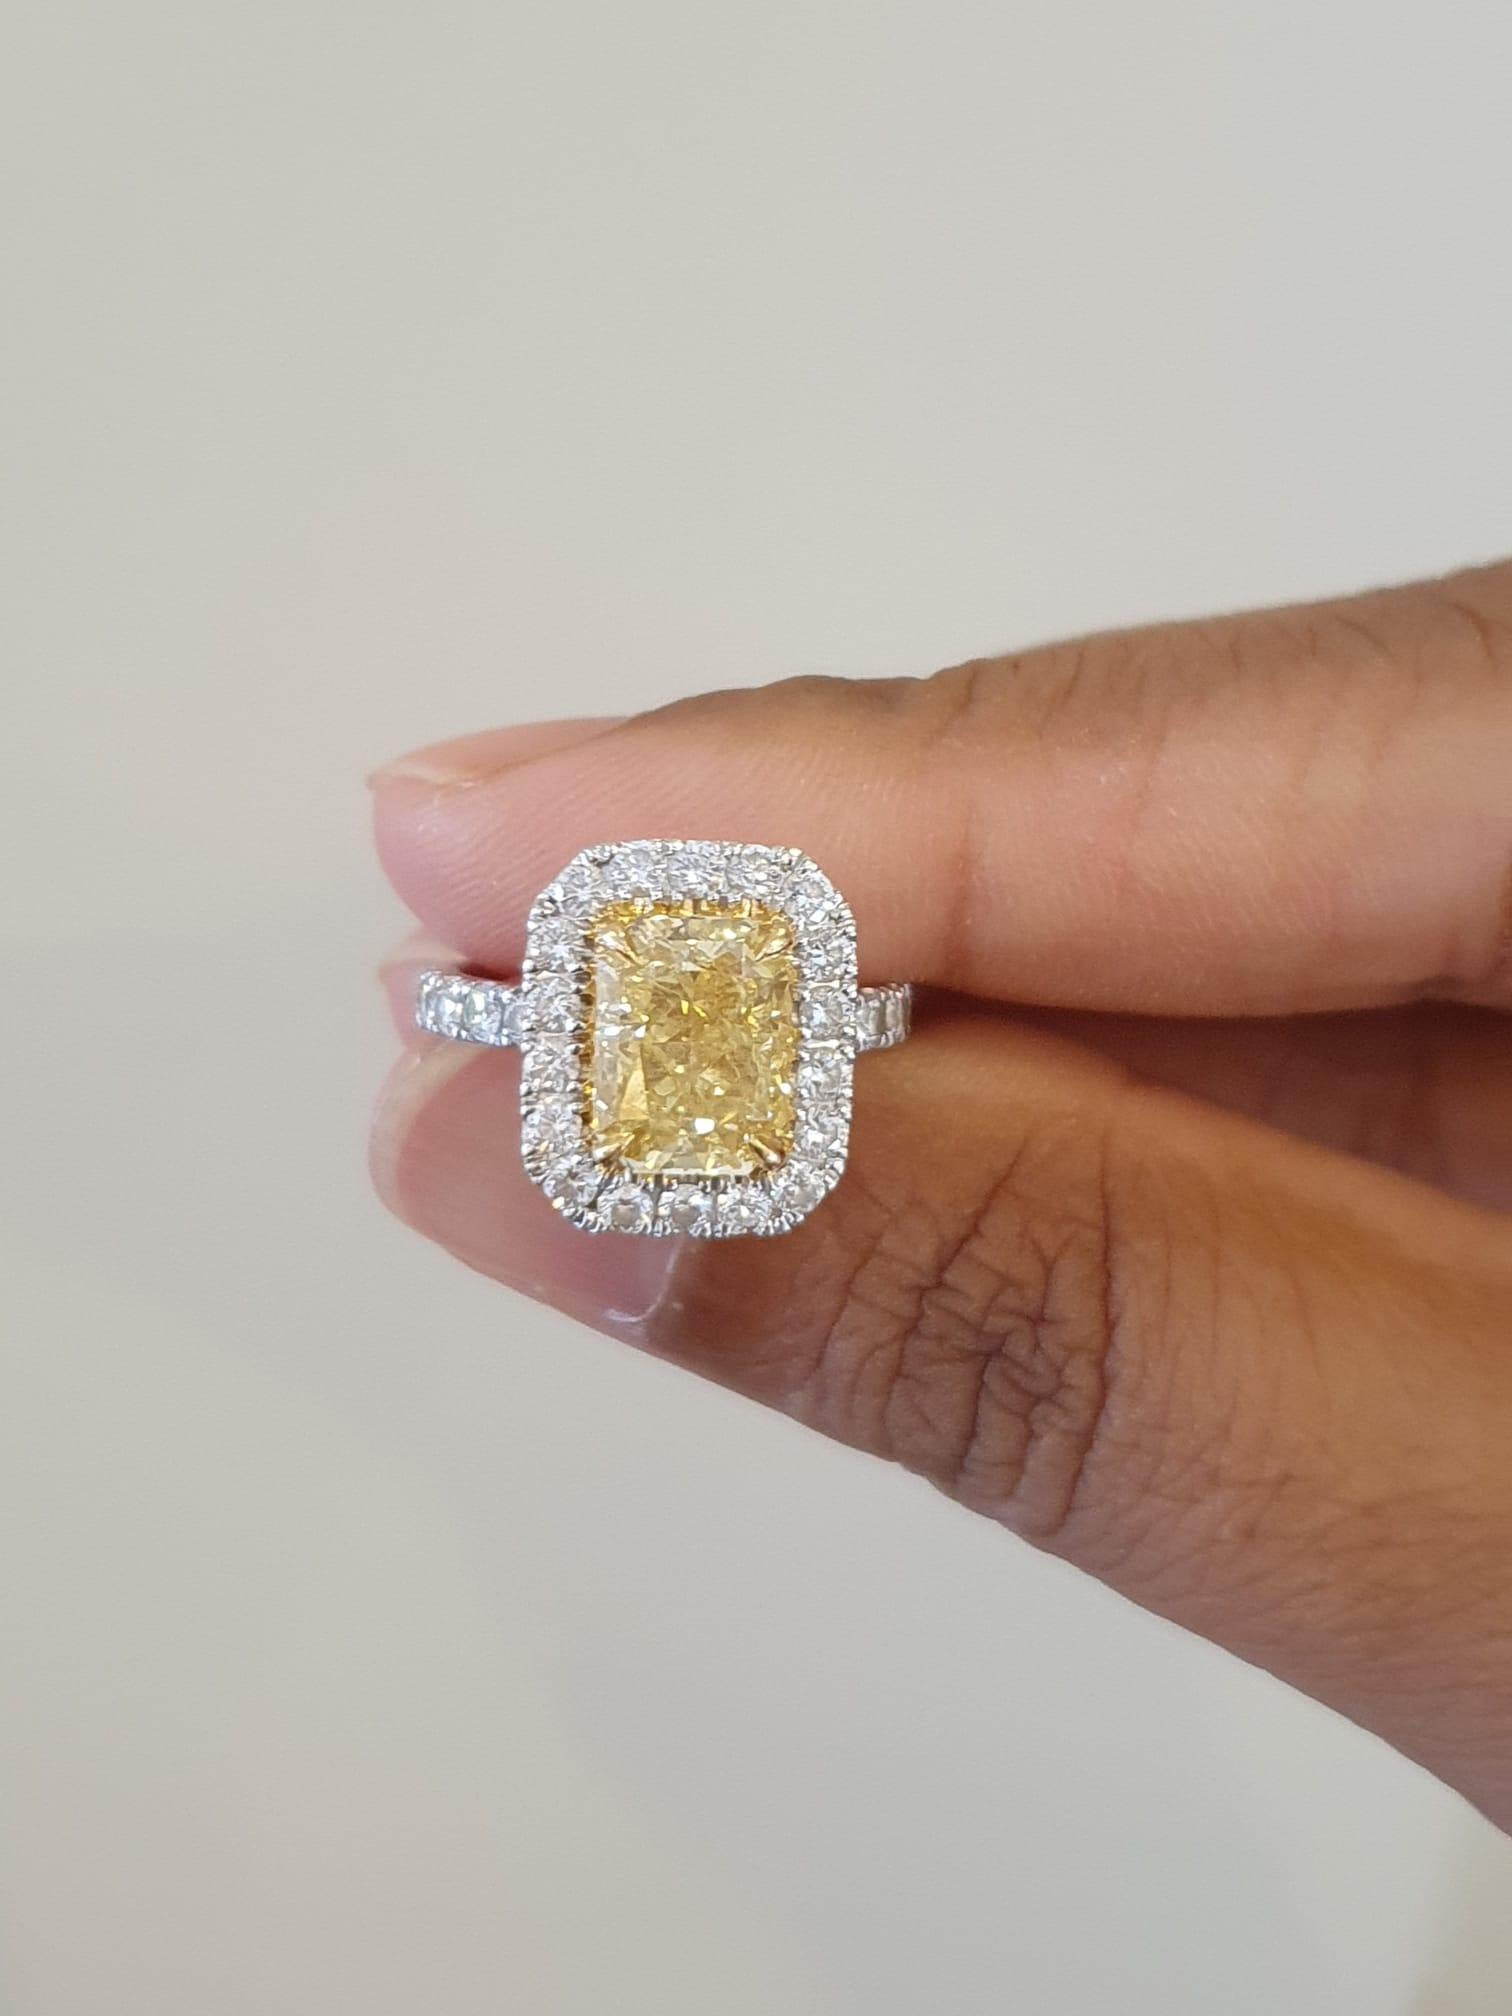 Stunning halo ring made from 18k white gold with 3.702 total carats of fancy radiant diamond and round brilliant diamonds. This ring comes with a fancy box.

-1 diamond main stone of 2.56 ct. 
cut: radiant
color: fancy intense yellow
clarity: